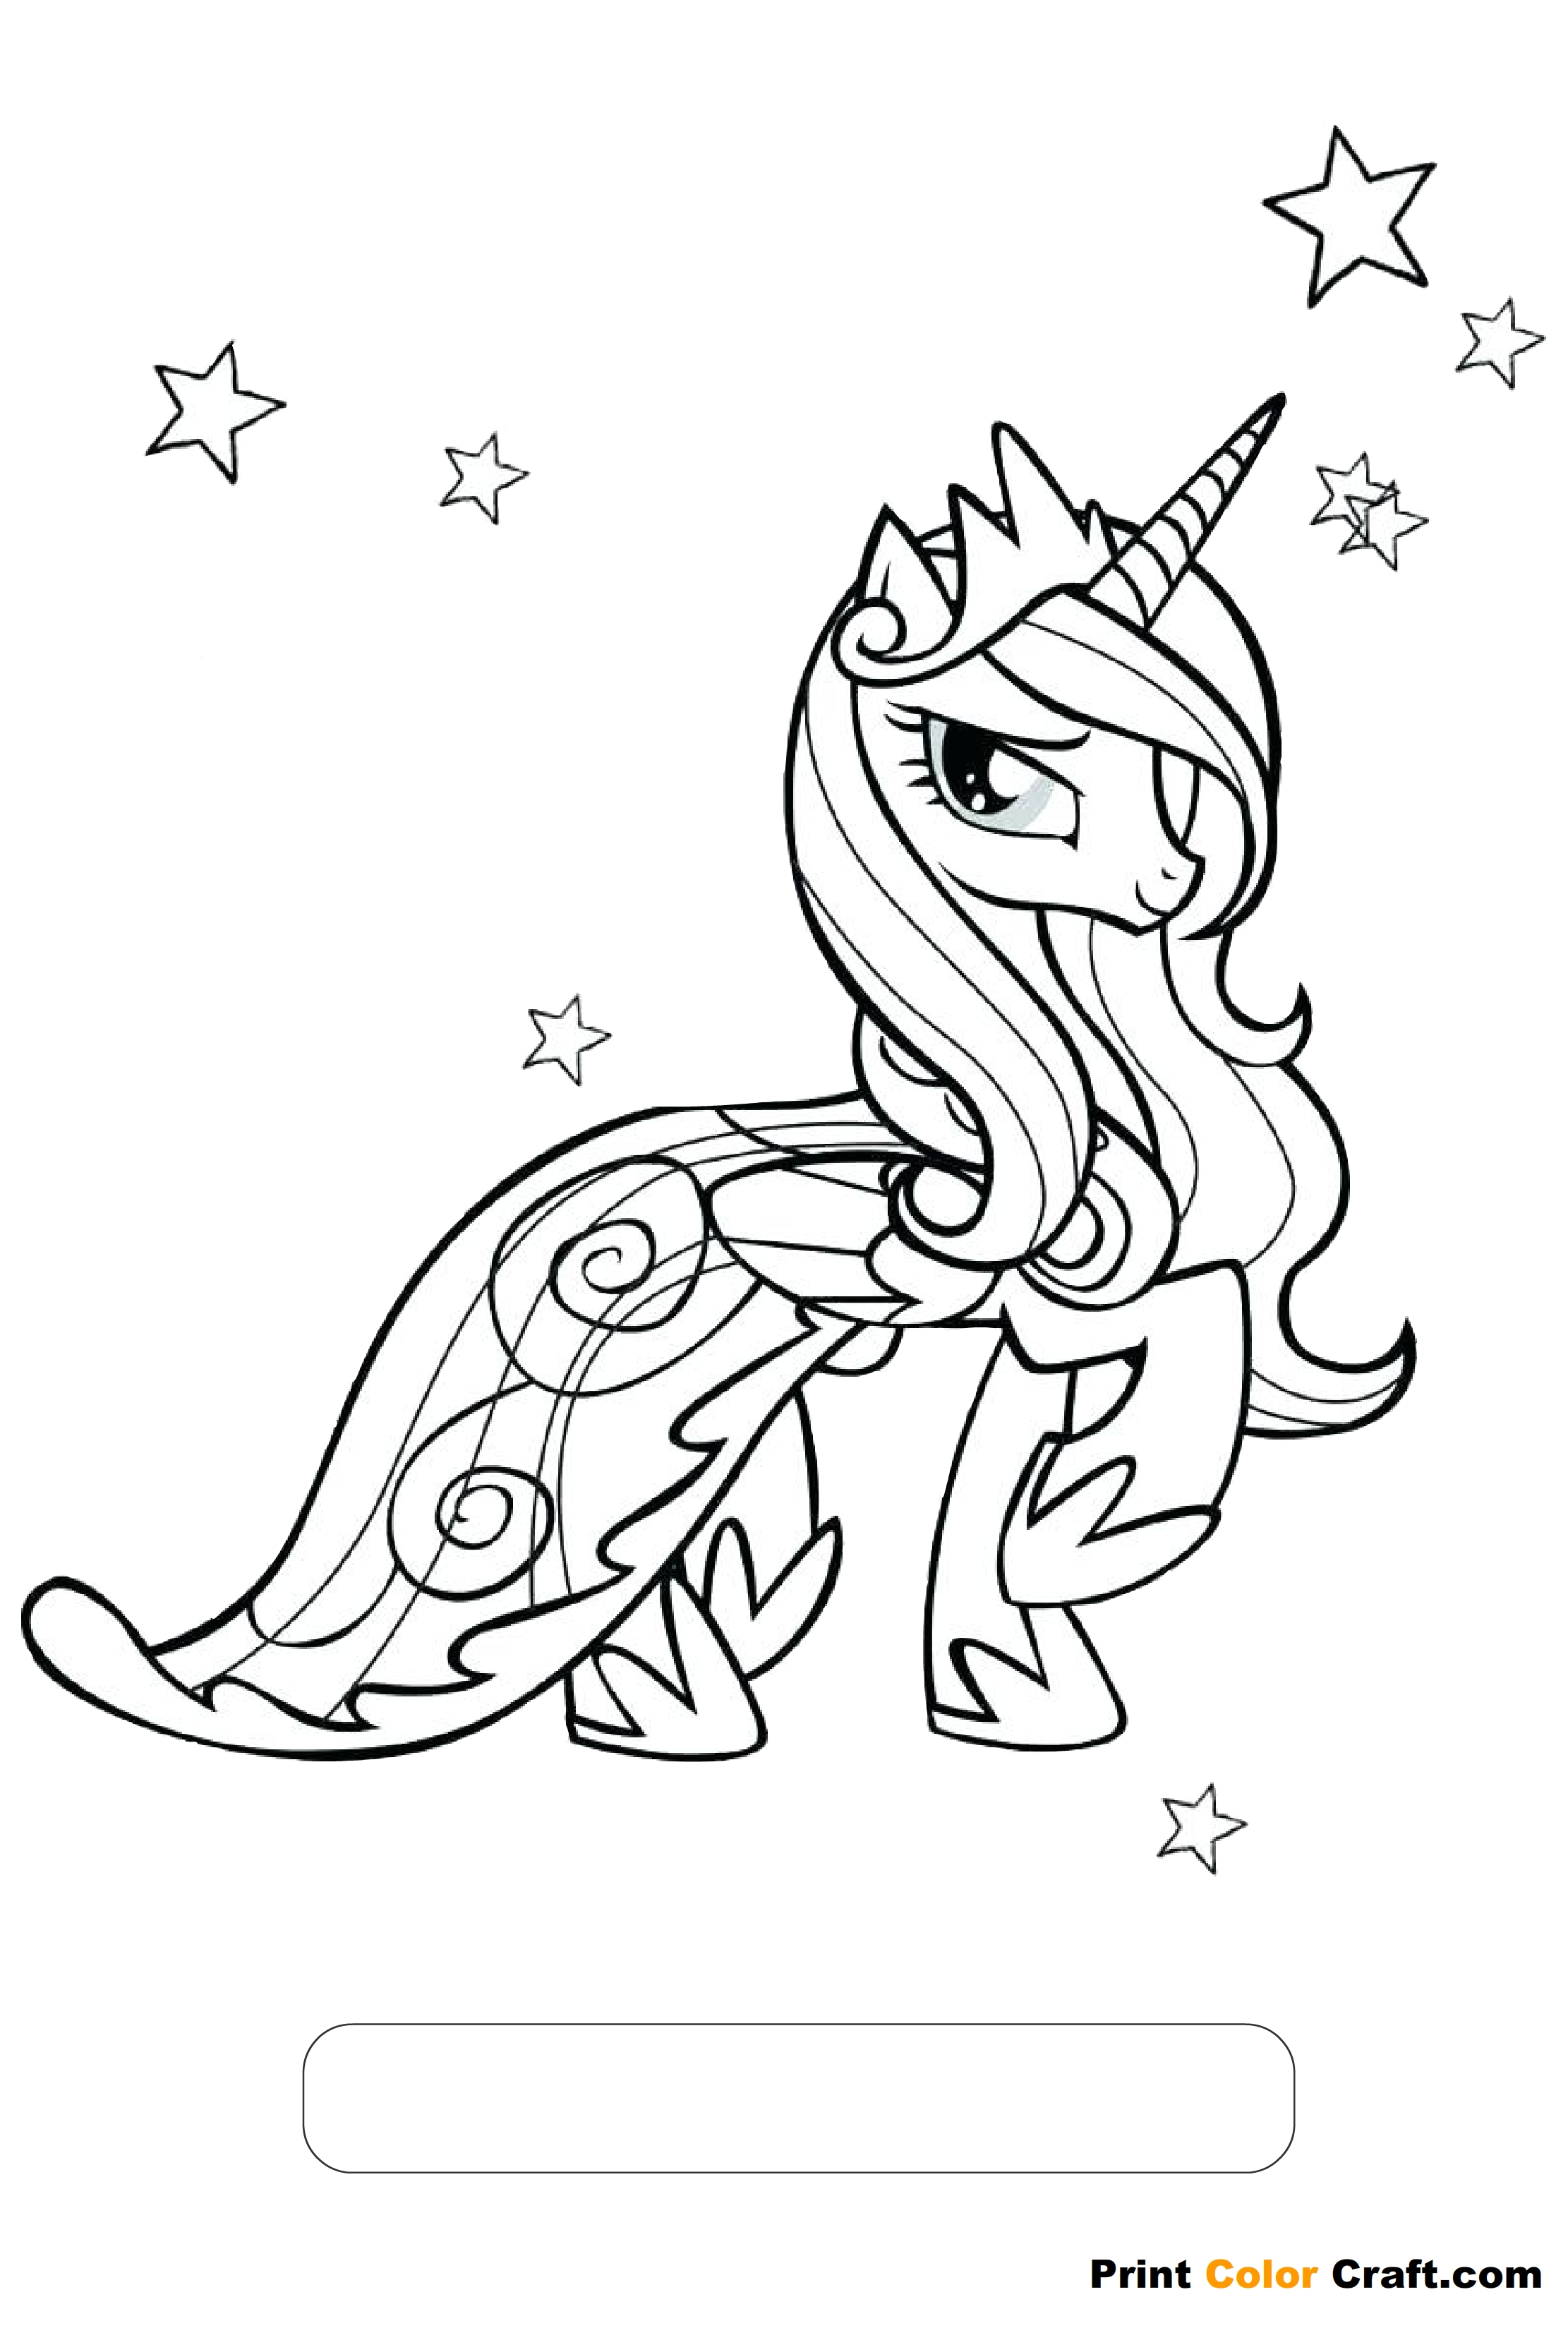 Adorable Unicorn Coloring Pages for Girls and Adults ...